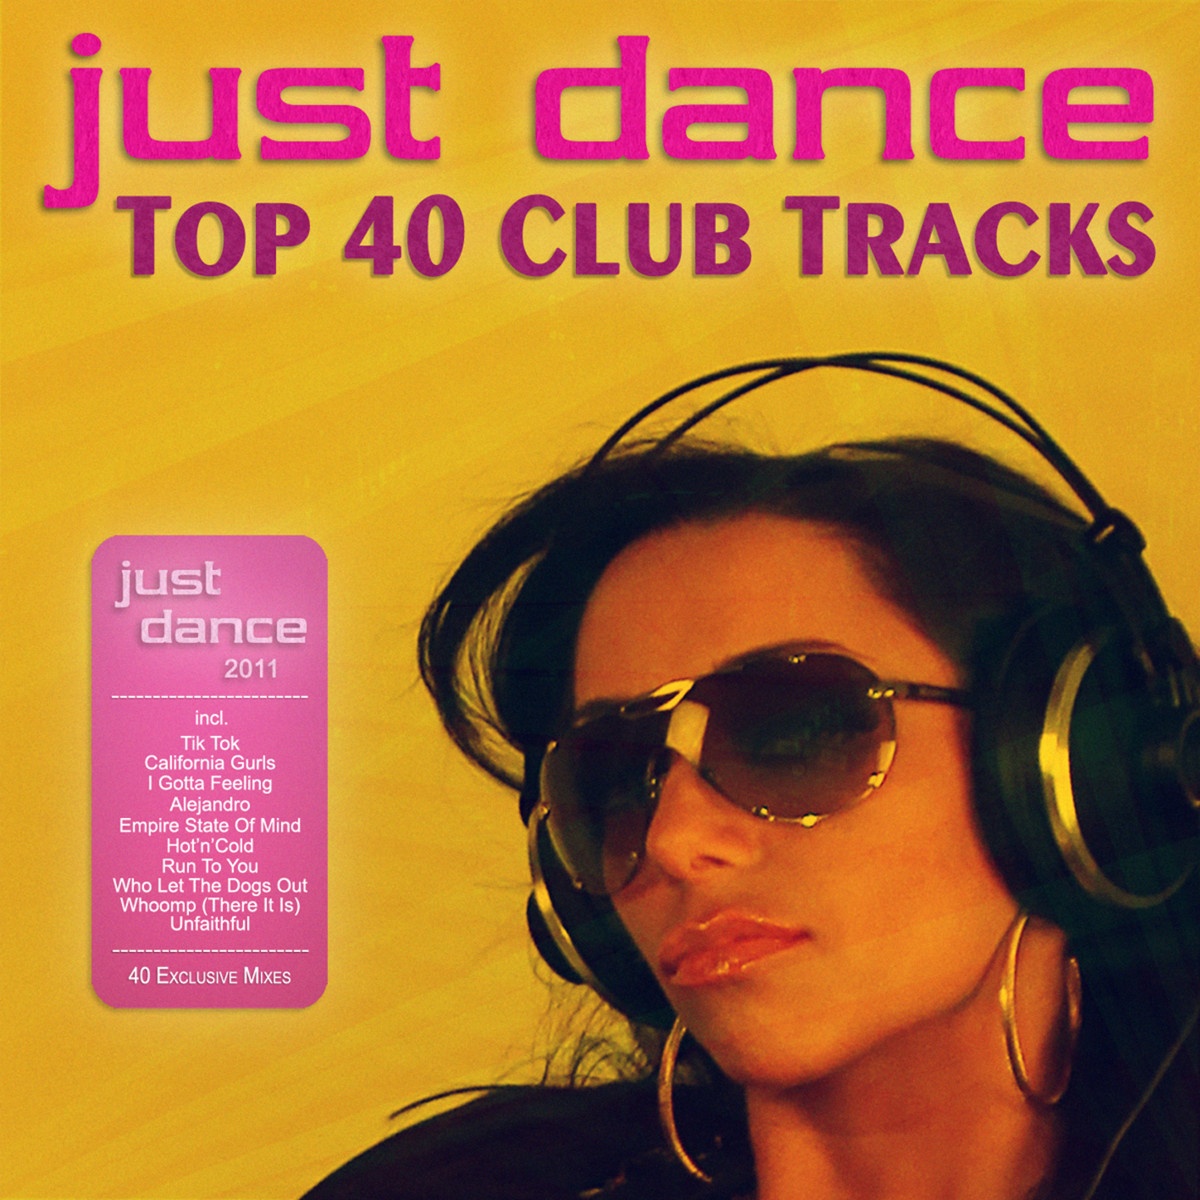 Just Dance 2011 - Top 40 Club Electro & House Tracks